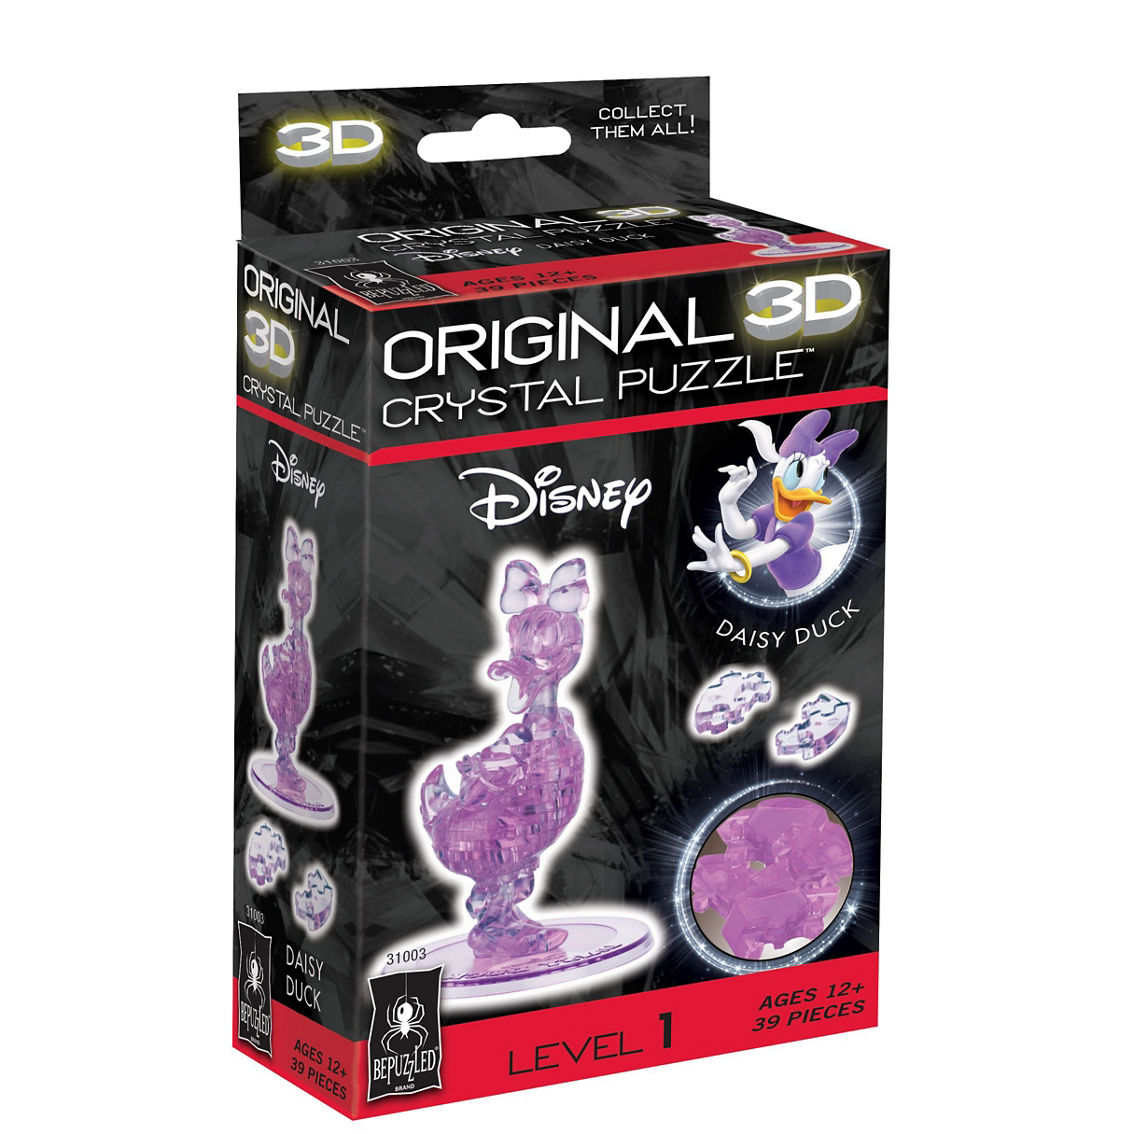 BePuzzled 3D Crystal Puzzle - Disney Daisy Duck: 39 Pcs - Image 2 of 2